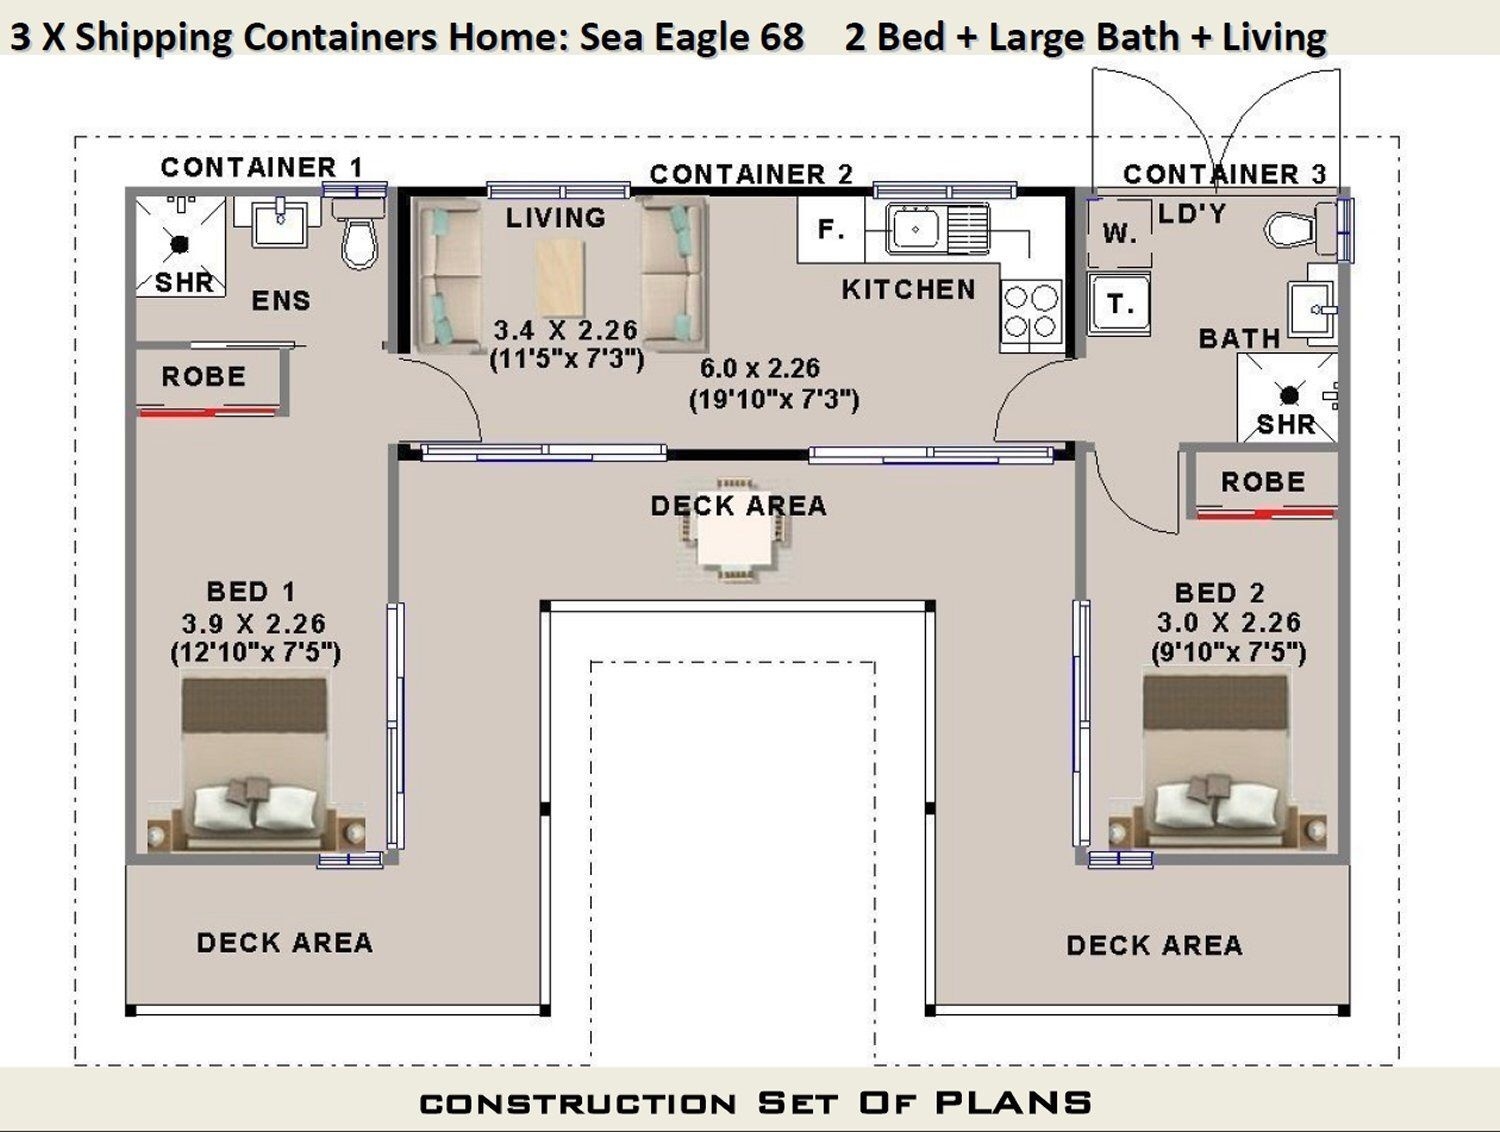 Best 3 x shipping containers 2 bedroom home full construction | etsy regarding outstanding container home design with floor plan